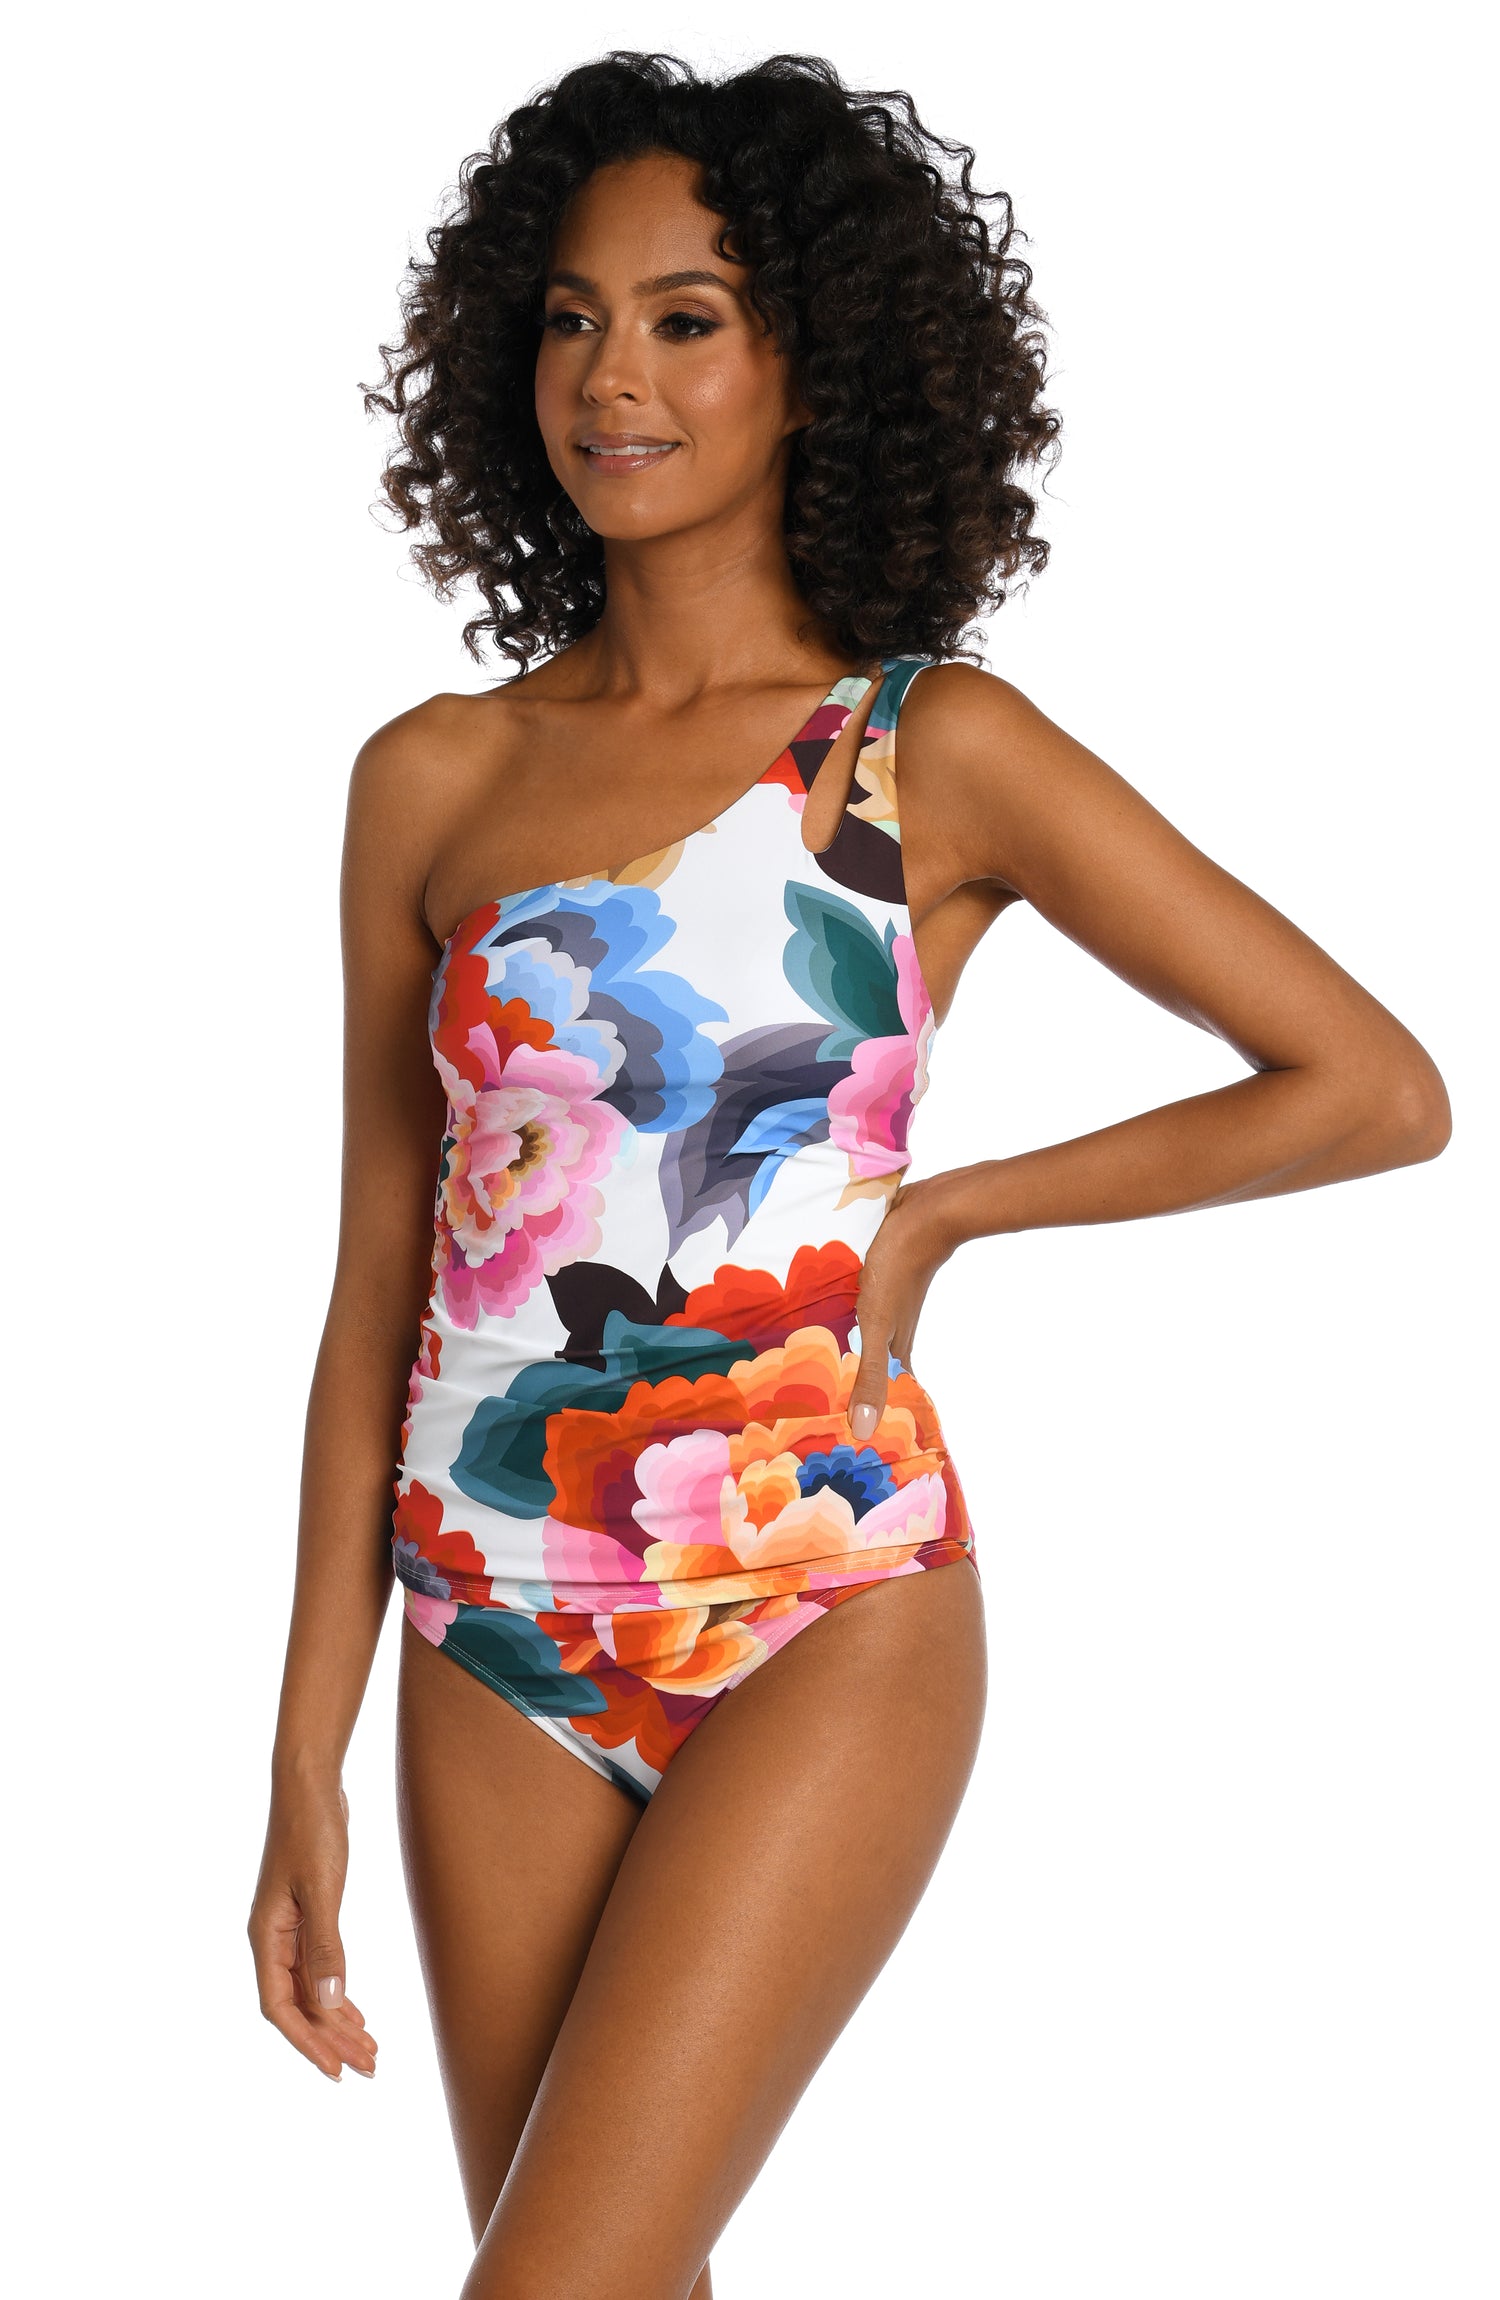 Model is wearing a multi colored floral printed keyhole tankini top from our Floral Rhythm collection!